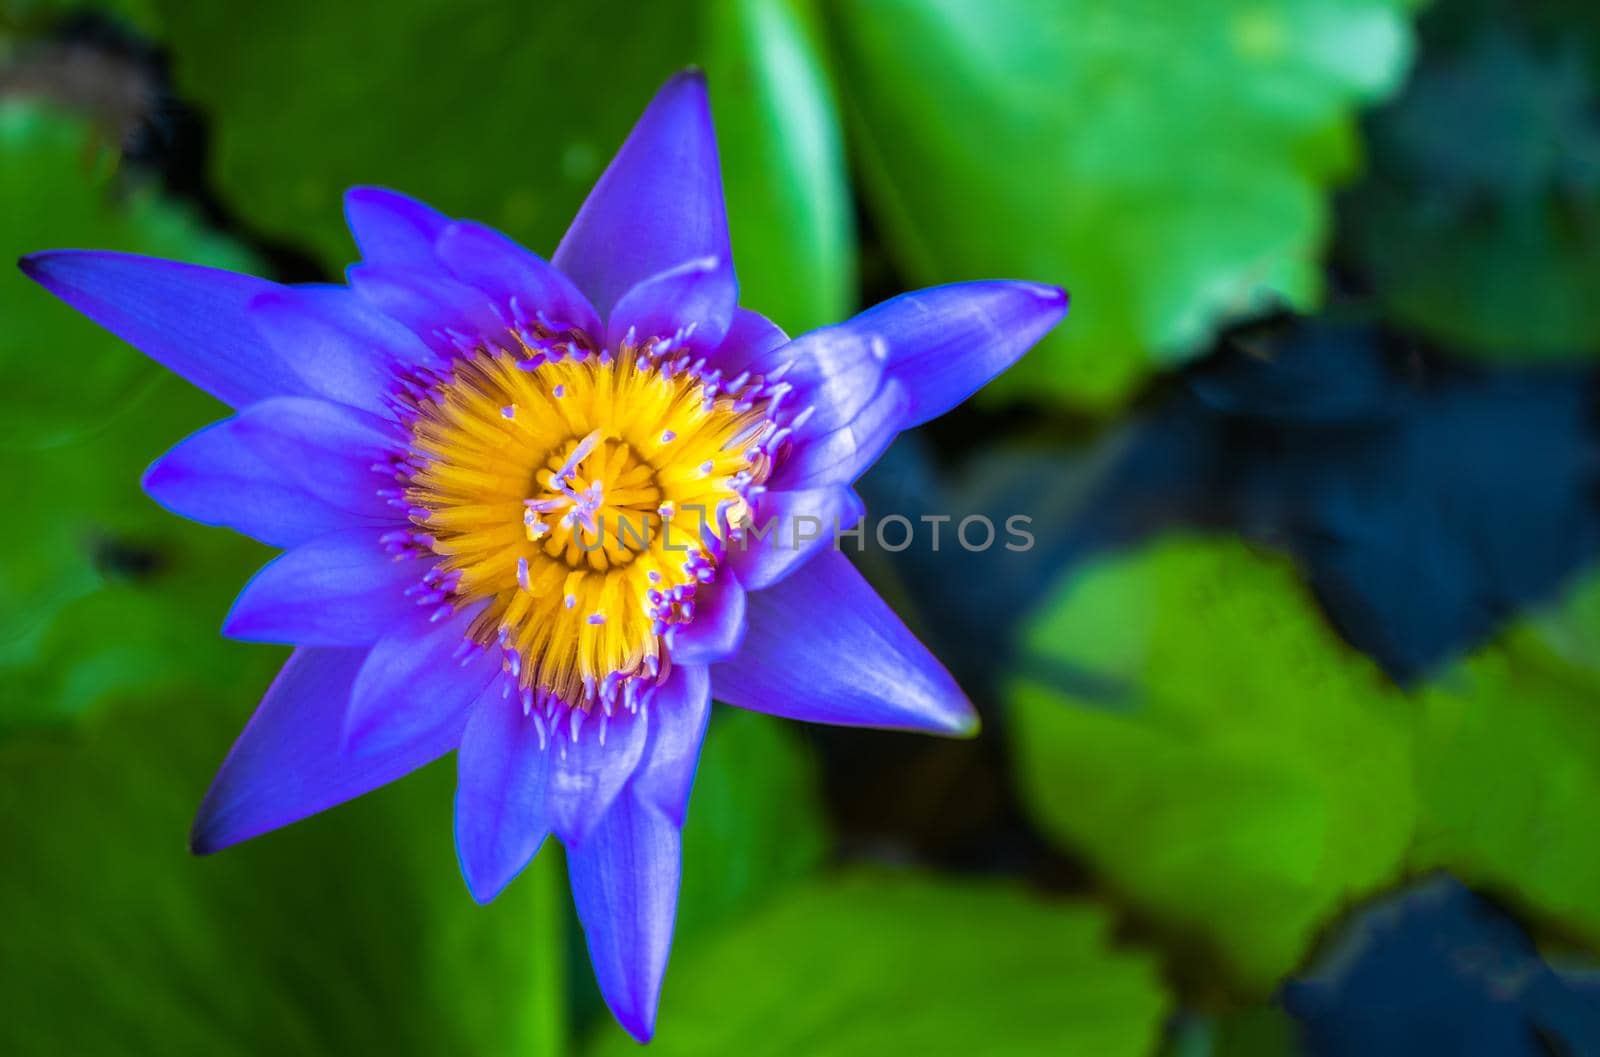 Blue lotus by suththisumdeang